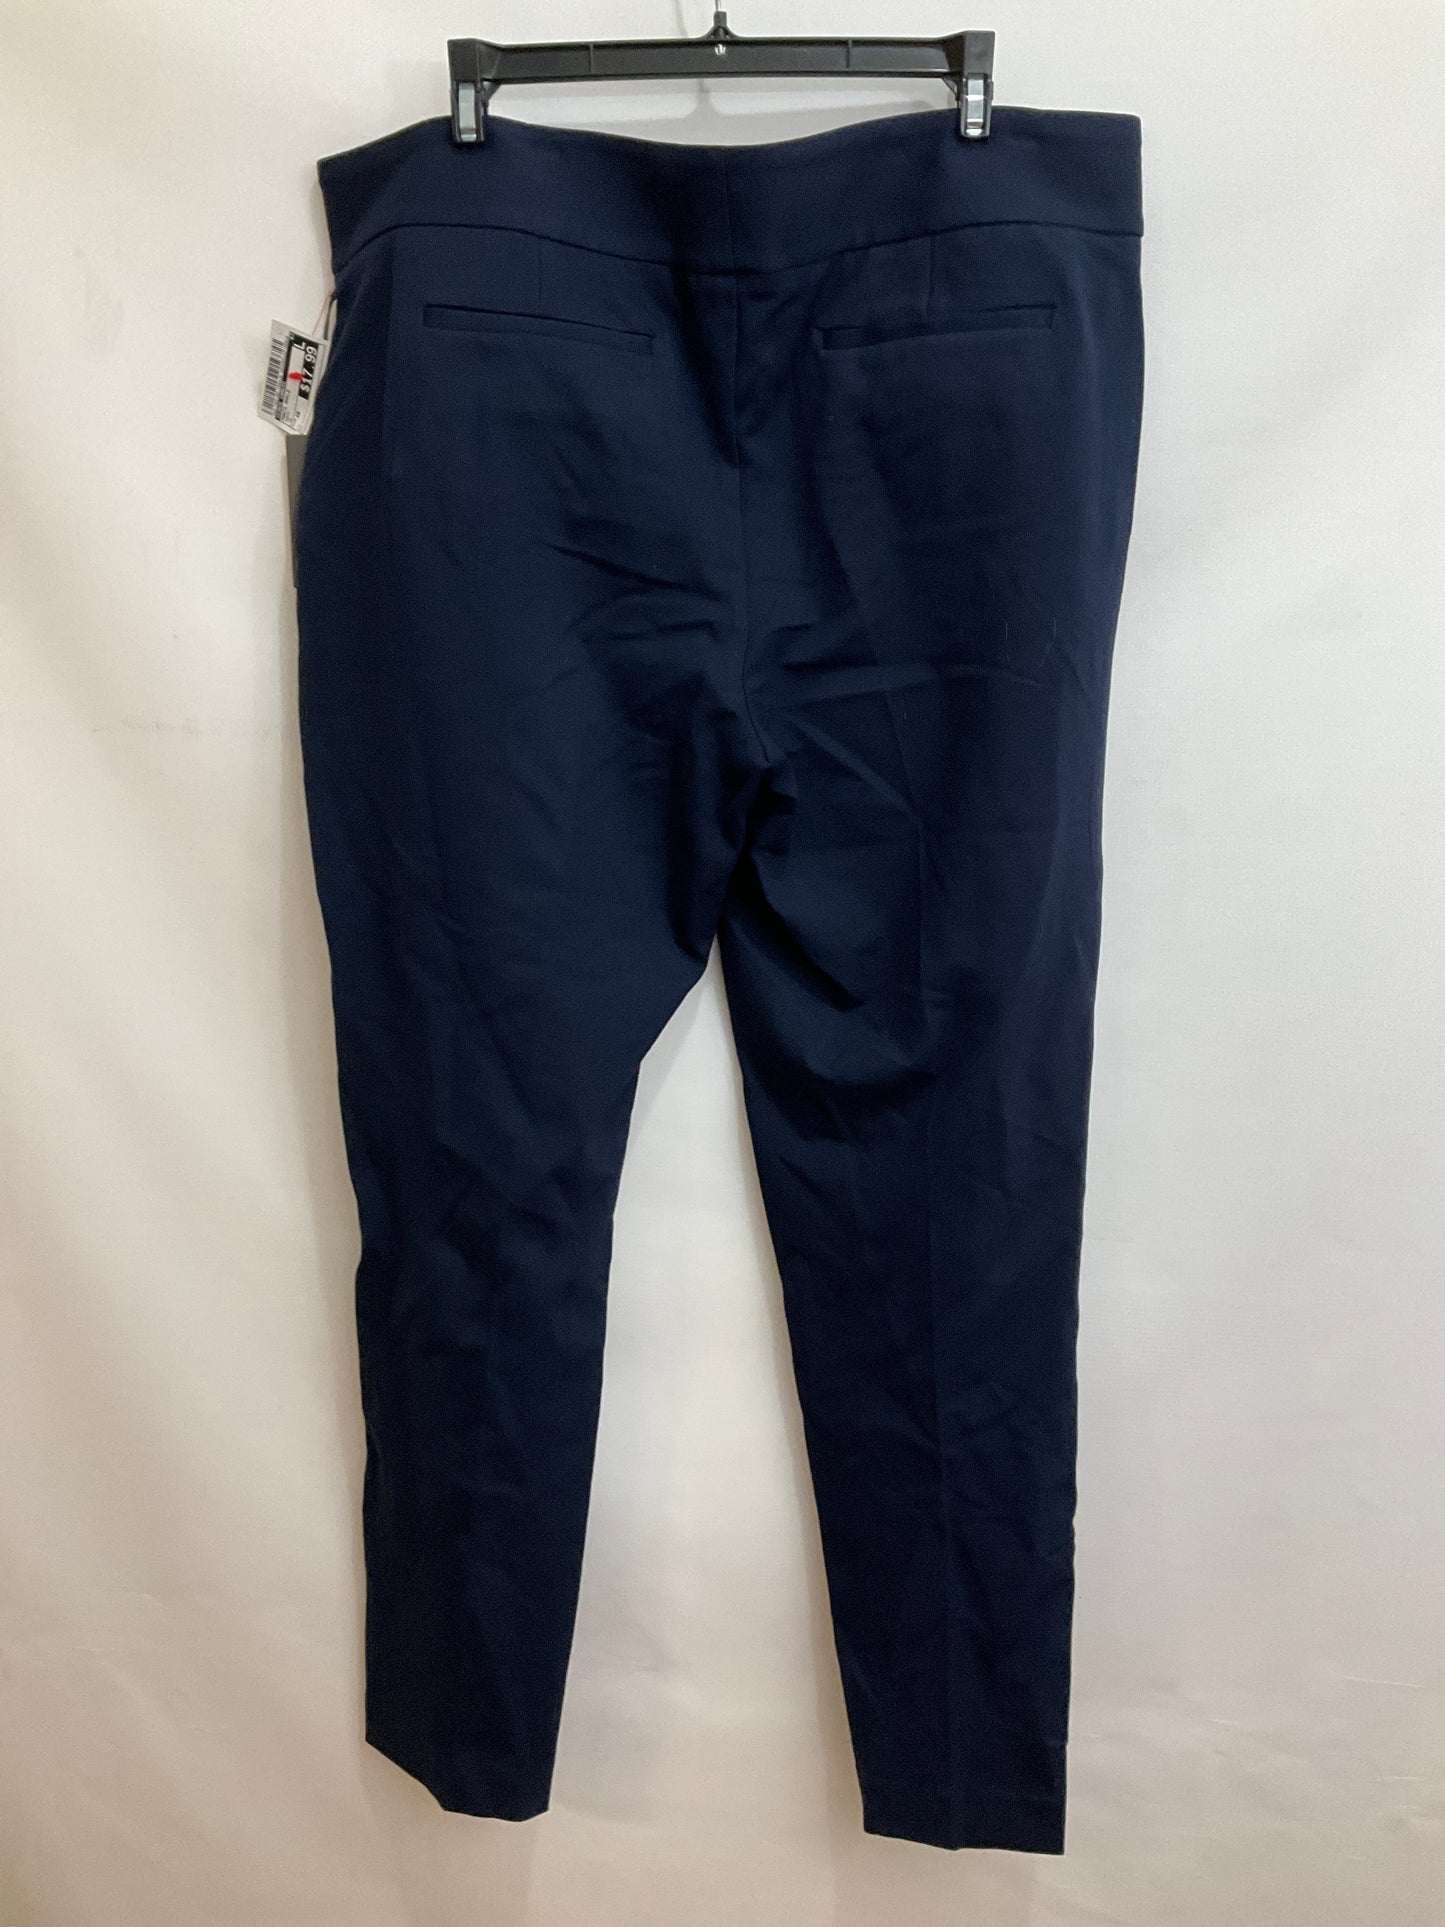 Navy Pants Ankle Vince Camuto, Size 16